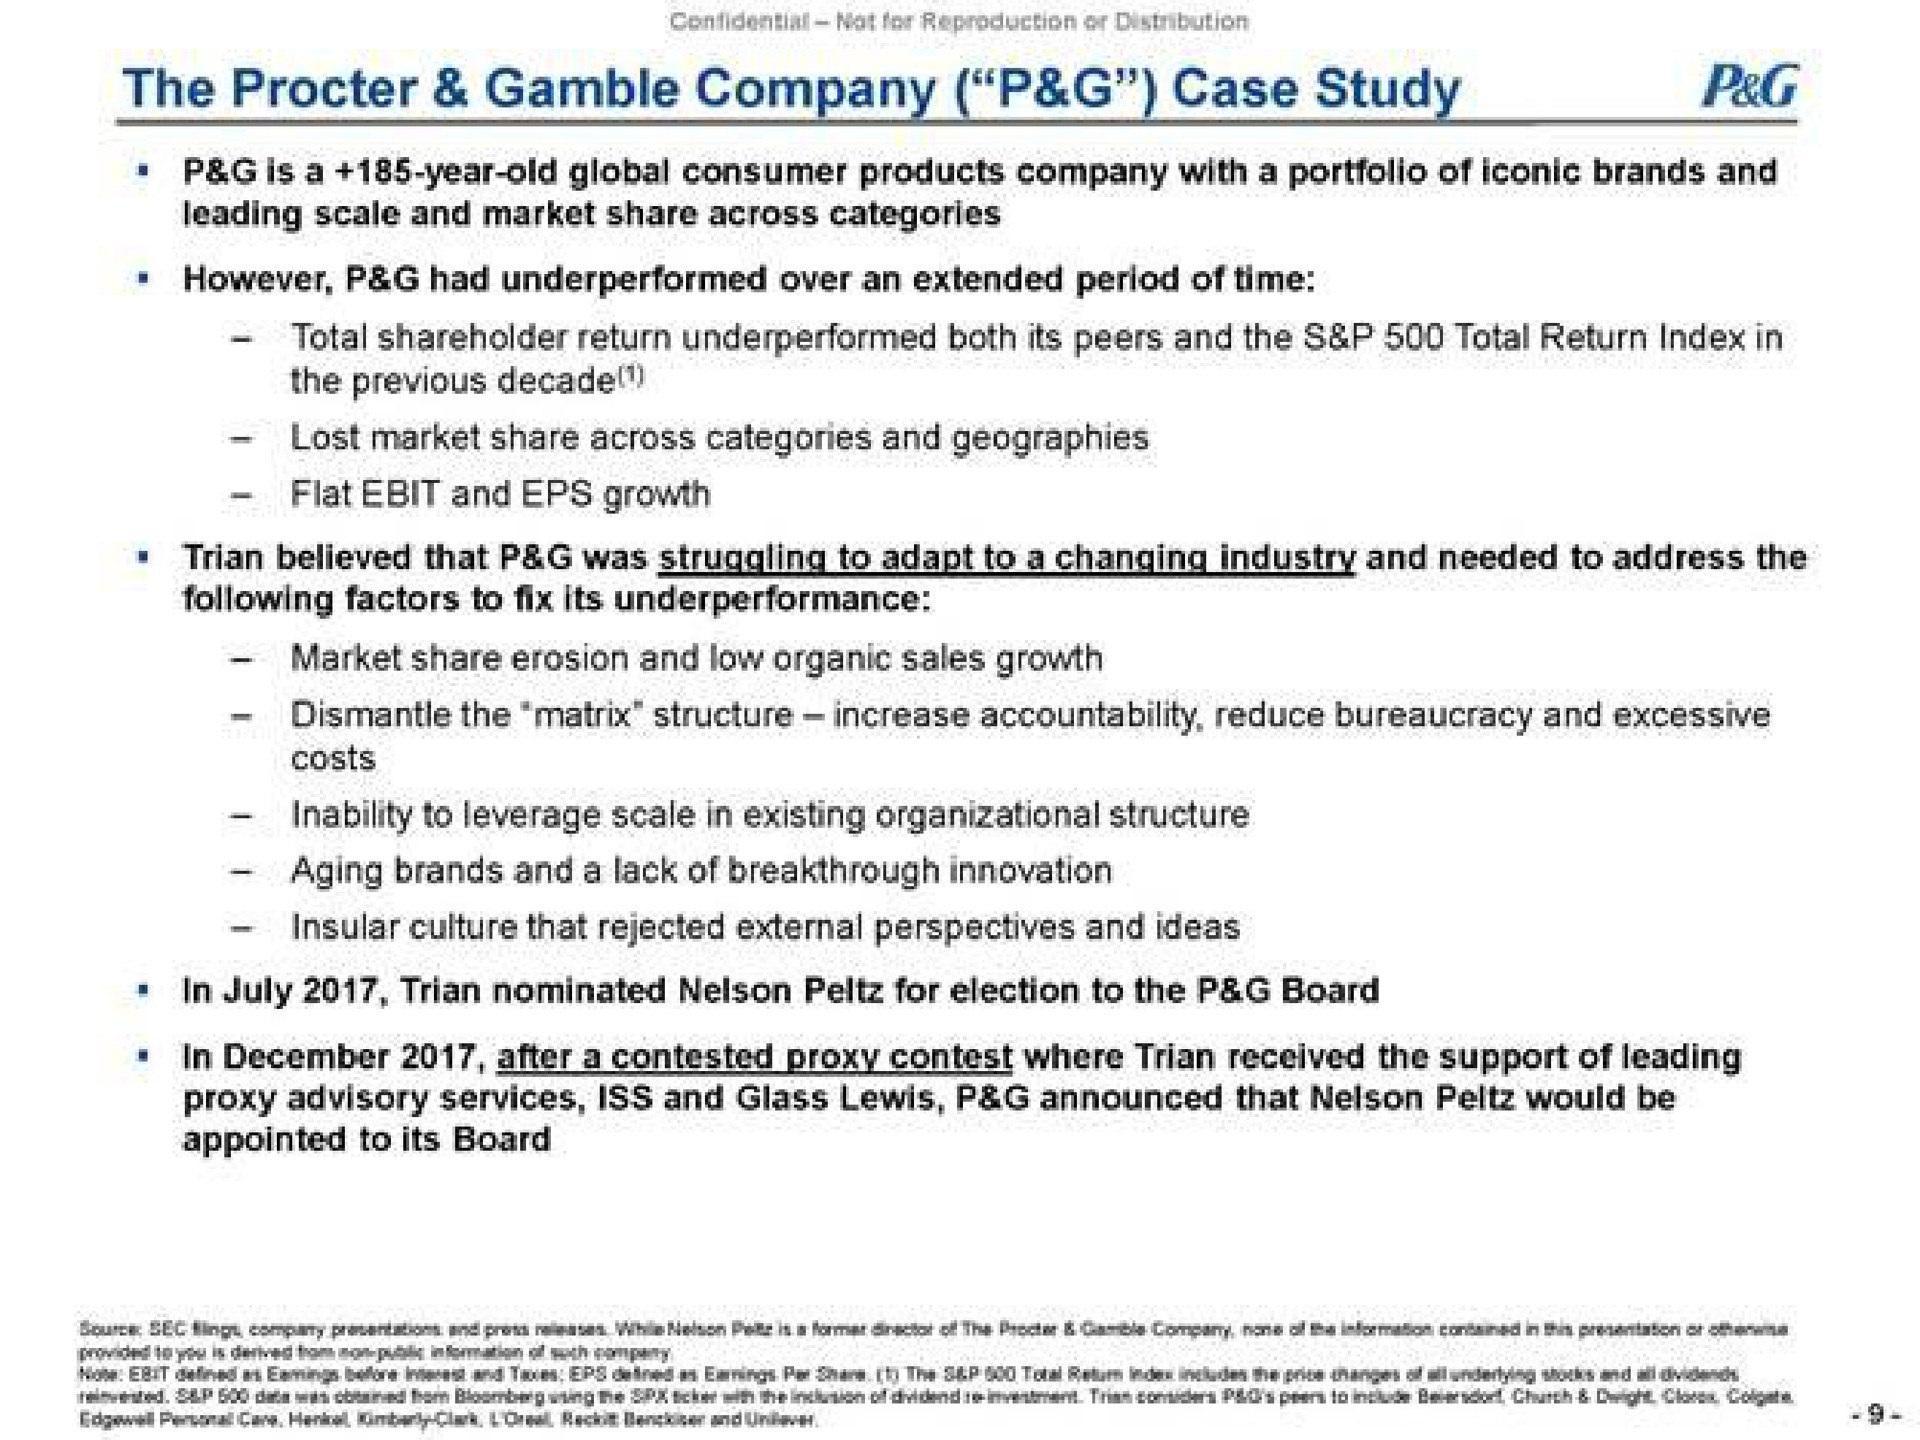 the gamble company case study is a year old global consumer products company with a portfolio of iconic brands and leading scale and market share across categories however peg had over an extended period of time total shareholder return both its peers and the total return index in the previous lost market share across and geographies flat and growth following factors to fix its market share erosion and low organic sales growth dismantle the matrix structure increase accountability reduce bureaucracy and excessive costs inability to leverage scale in existing organizational structure aging brands and a lack of breakthrough innovation insular culture that rejected external perspectives and ideas in nominated nelson for election to the board in after a contested proxy contest where received the support of leading proxy advisory services iss and glass lewis peg announced that nelson would be | Trian Partners